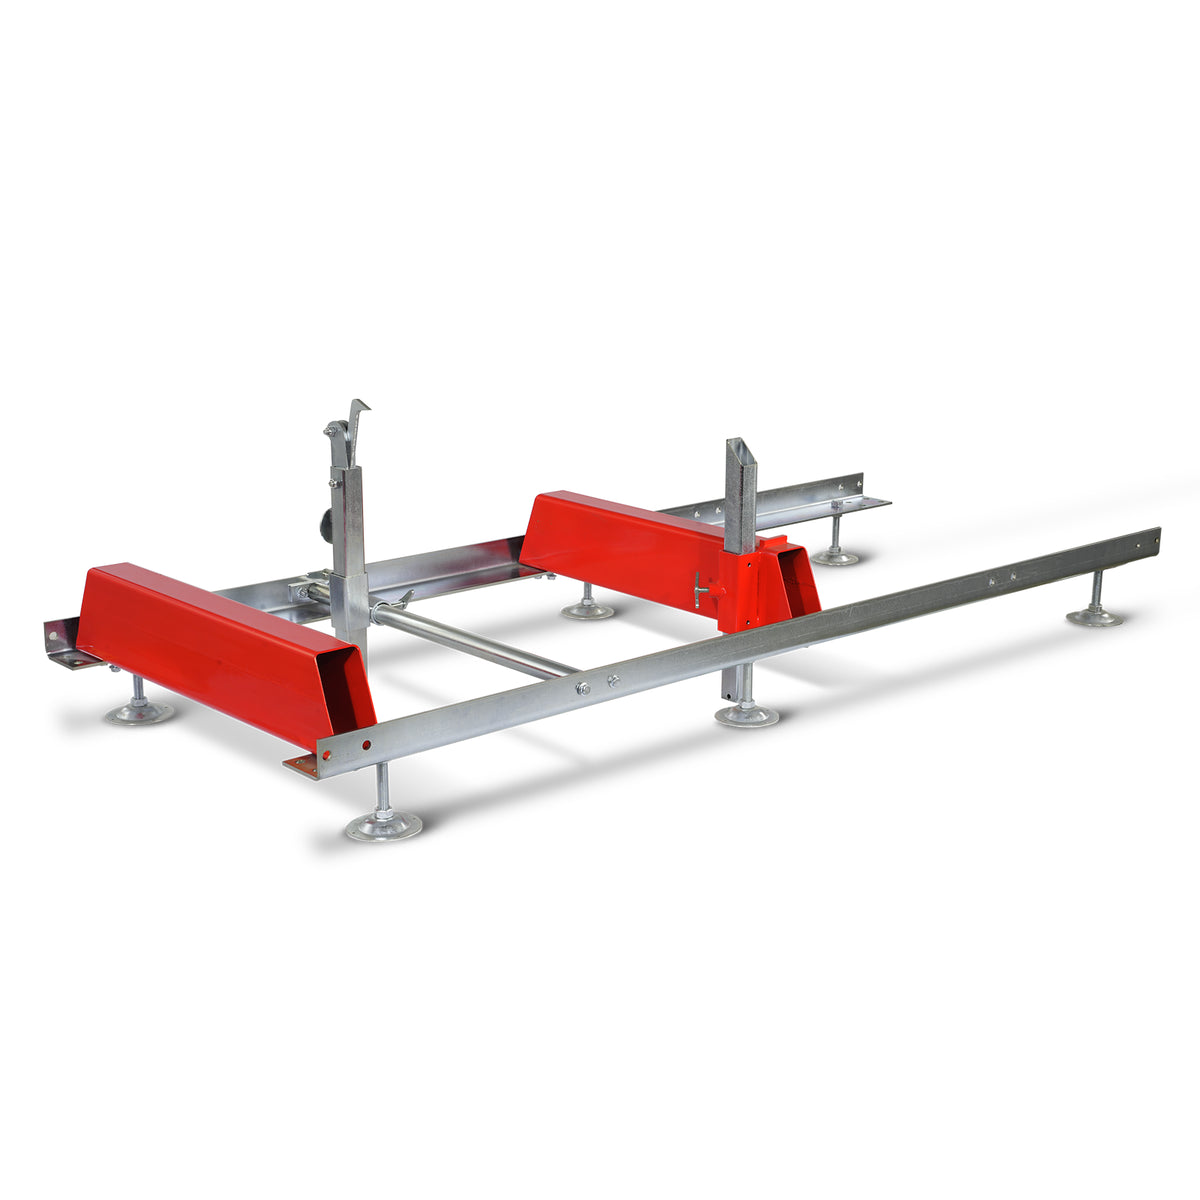 Track Extension for 26" Portable Sawmill, SM-26 (sku：150166）